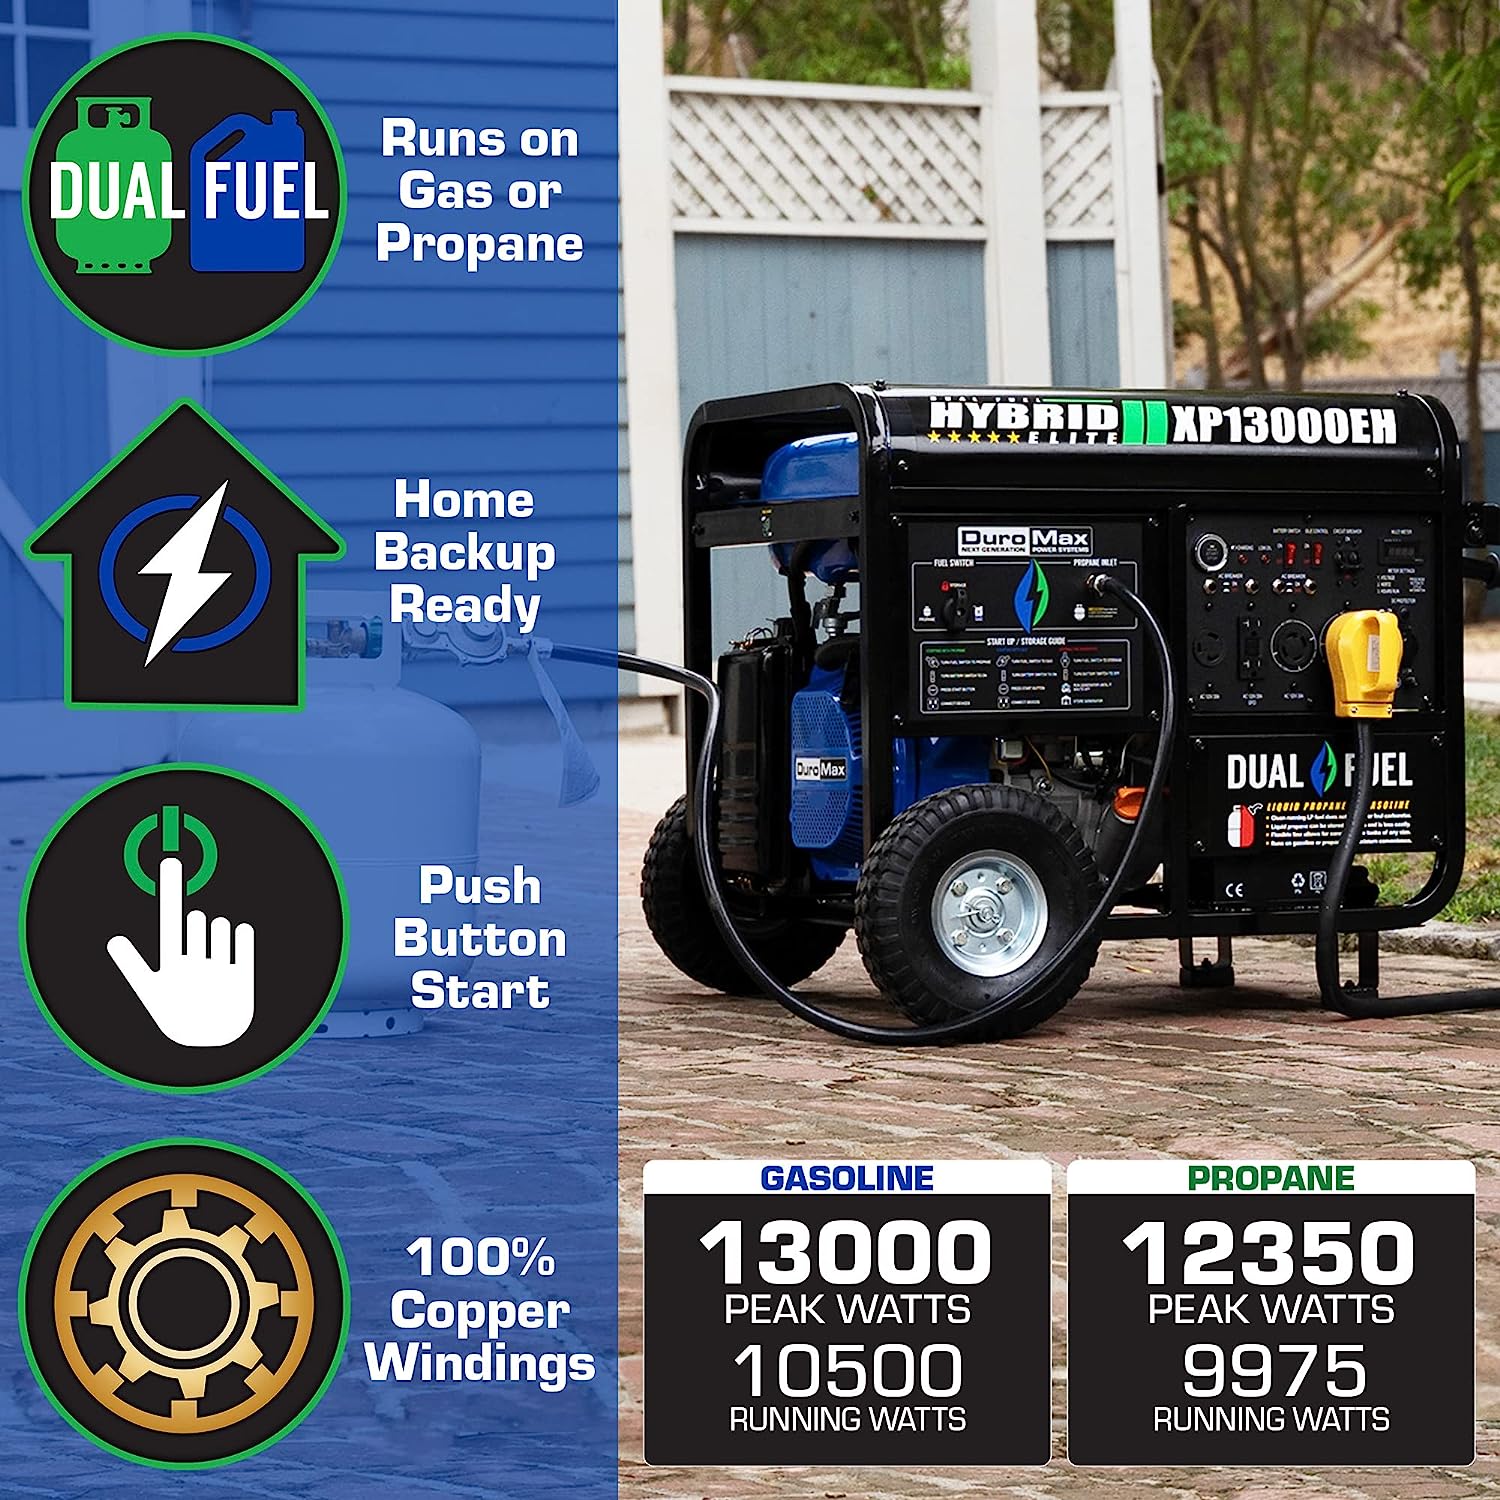 DuroMax XP13000EH Review: The Ultimate Dual Fuel Portable Generator for Home and Adventure